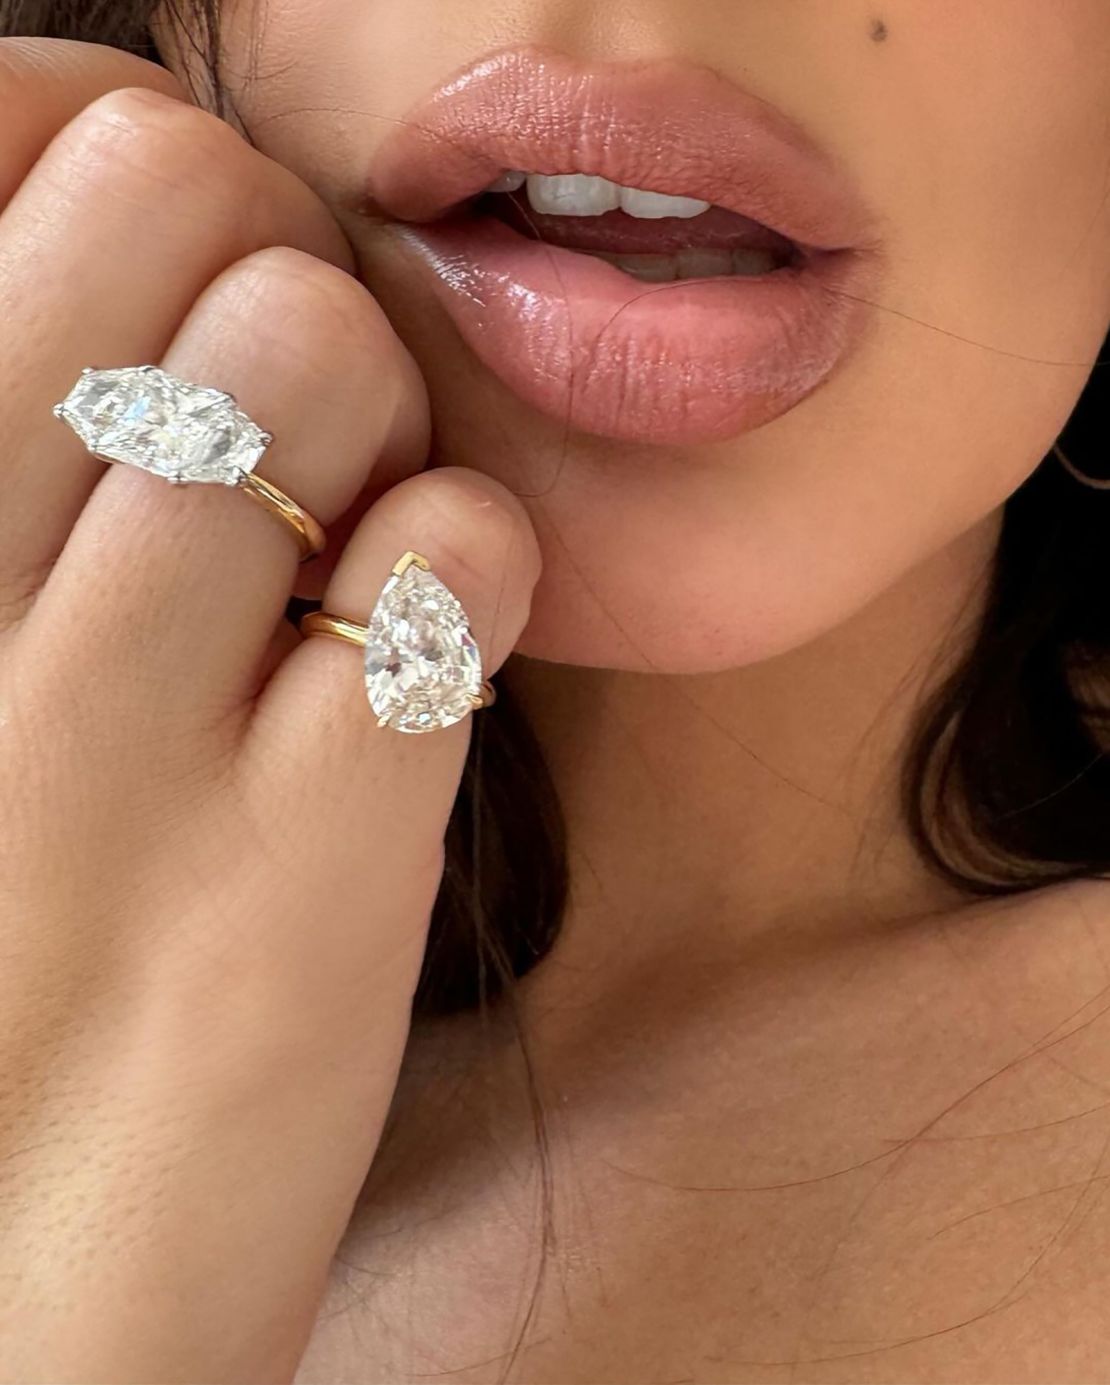 Ratajkowski told Vogue she was inspired by a story in The Paris Review in which the author writes of a grandmother's ring made of stones from her previous marriages.